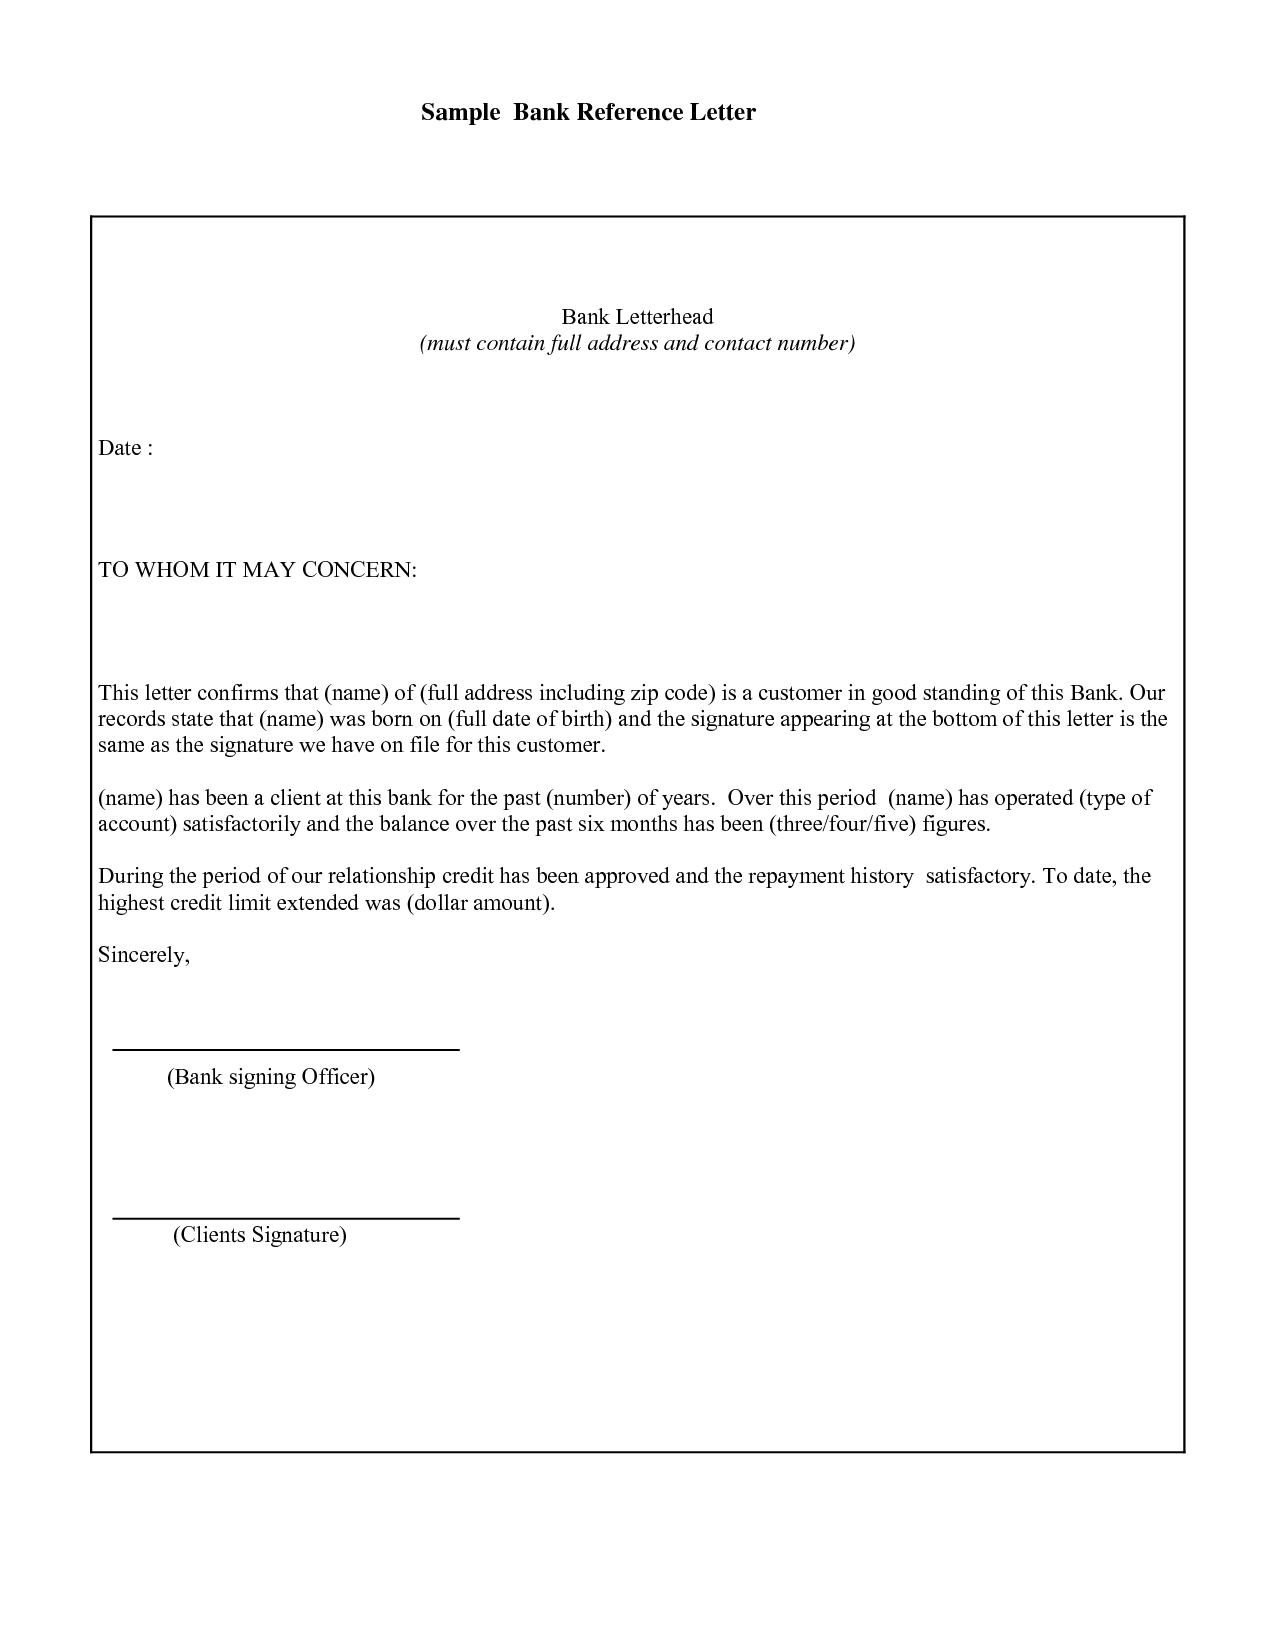 Bank reference. Reference Letter from Bank. Bank reference Letter пример. Bank reference Letter Sample. Bank reference Letter Template образец.